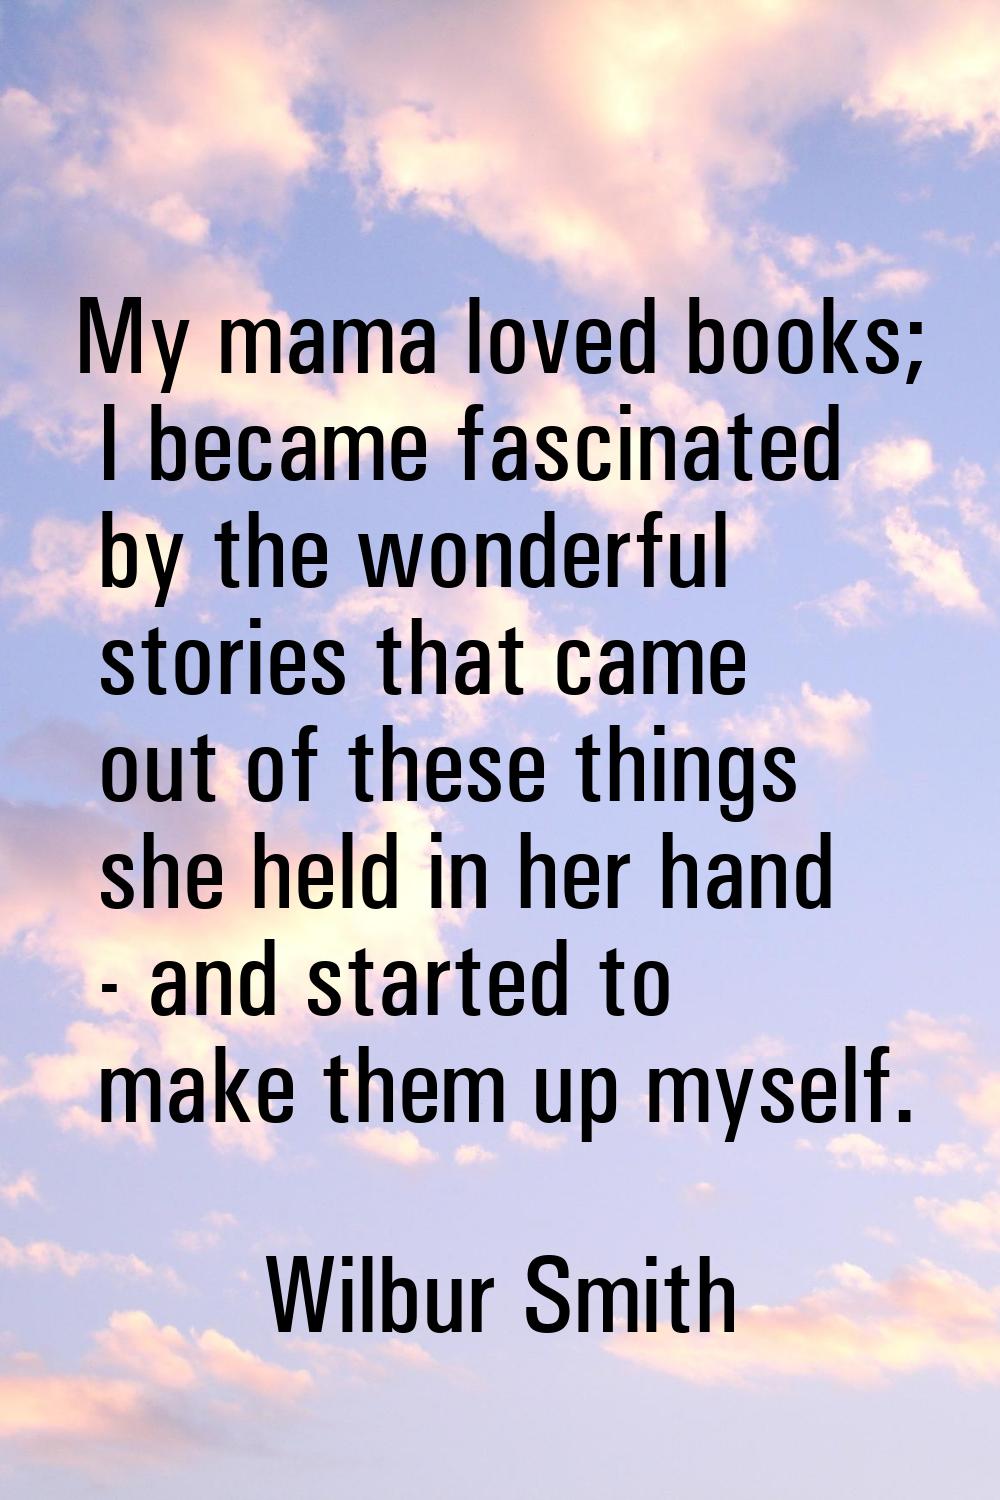 My mama loved books; I became fascinated by the wonderful stories that came out of these things she